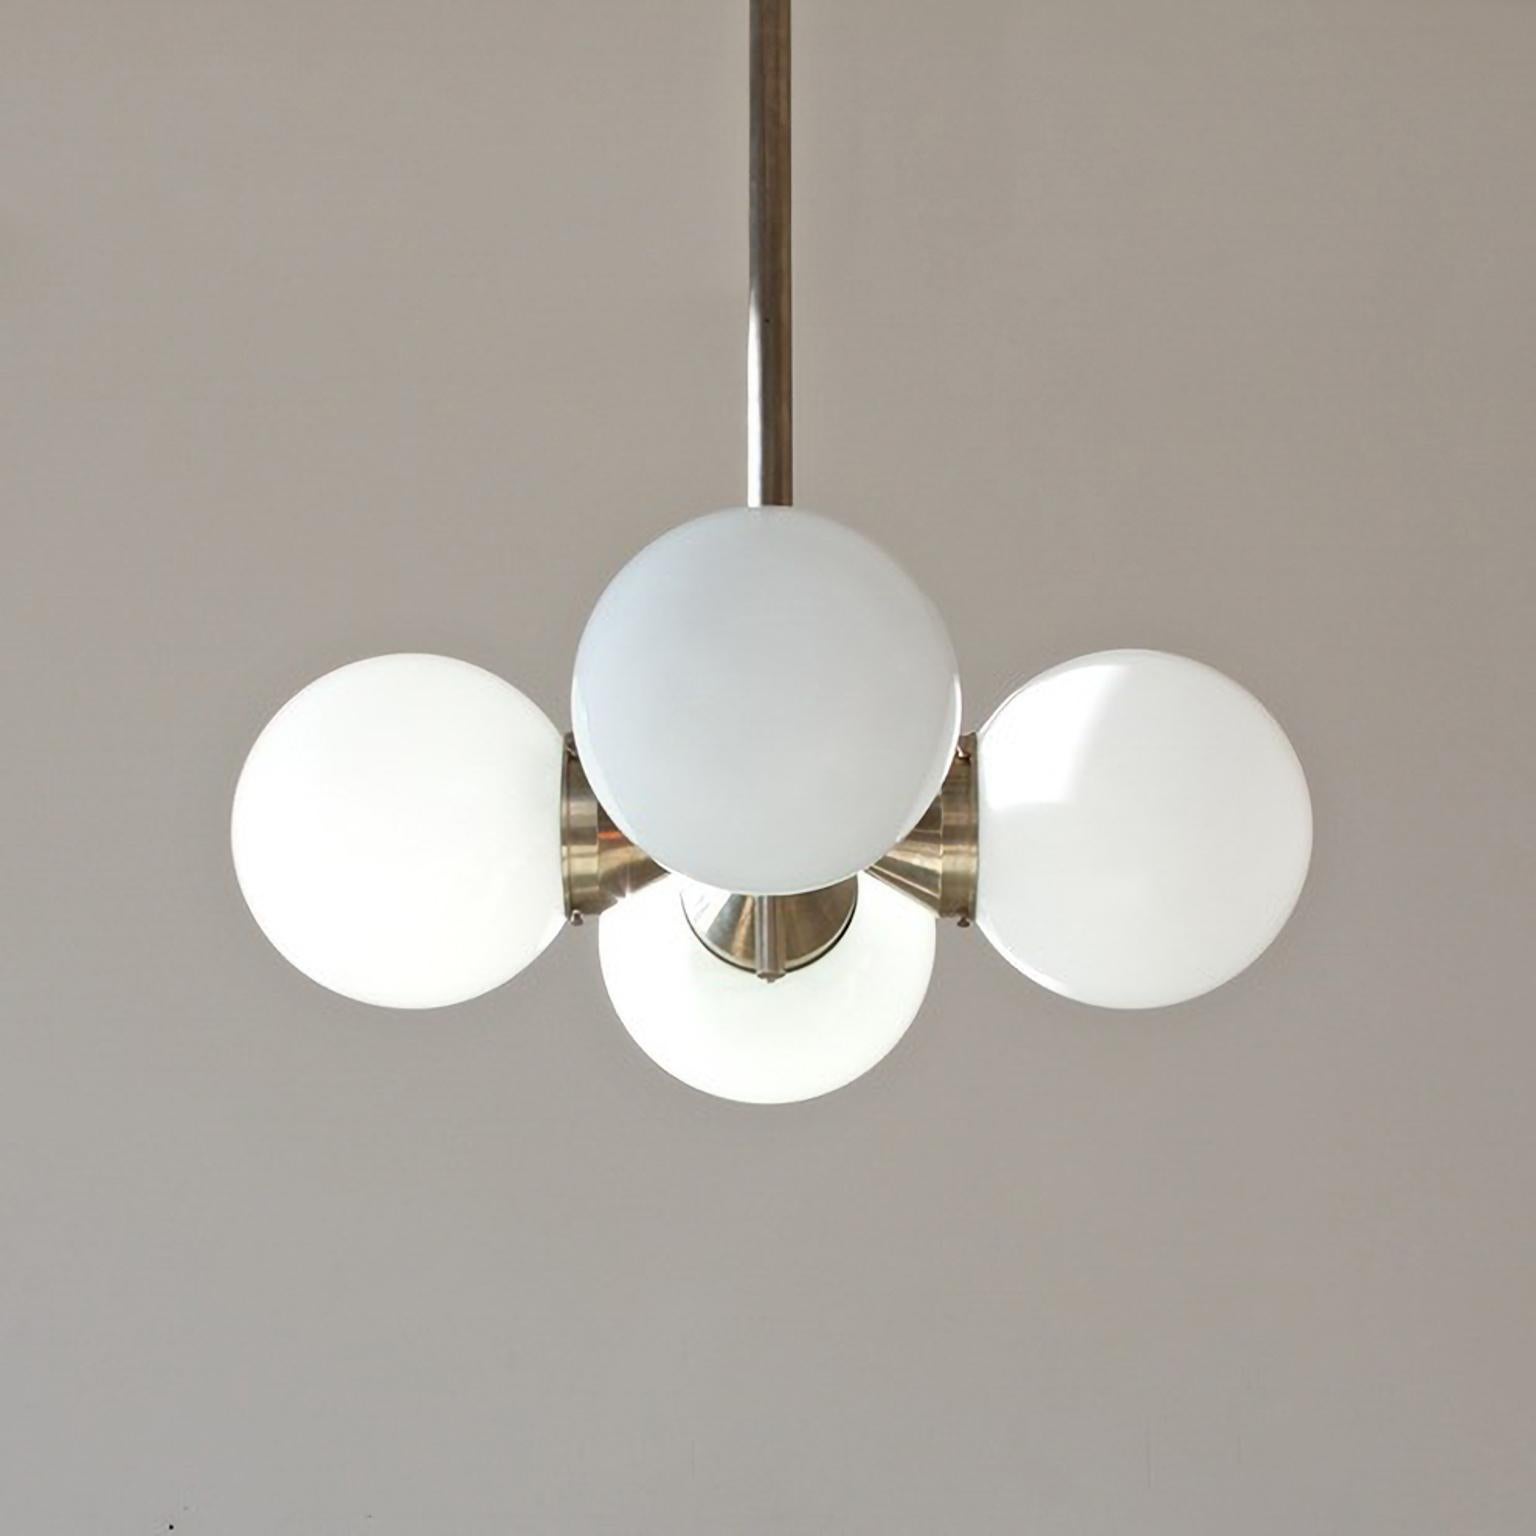 Modernist Pendant Light with 4 Opaline Glass Bulbs, Nickel Plated Brass c. 1930 For Sale 2